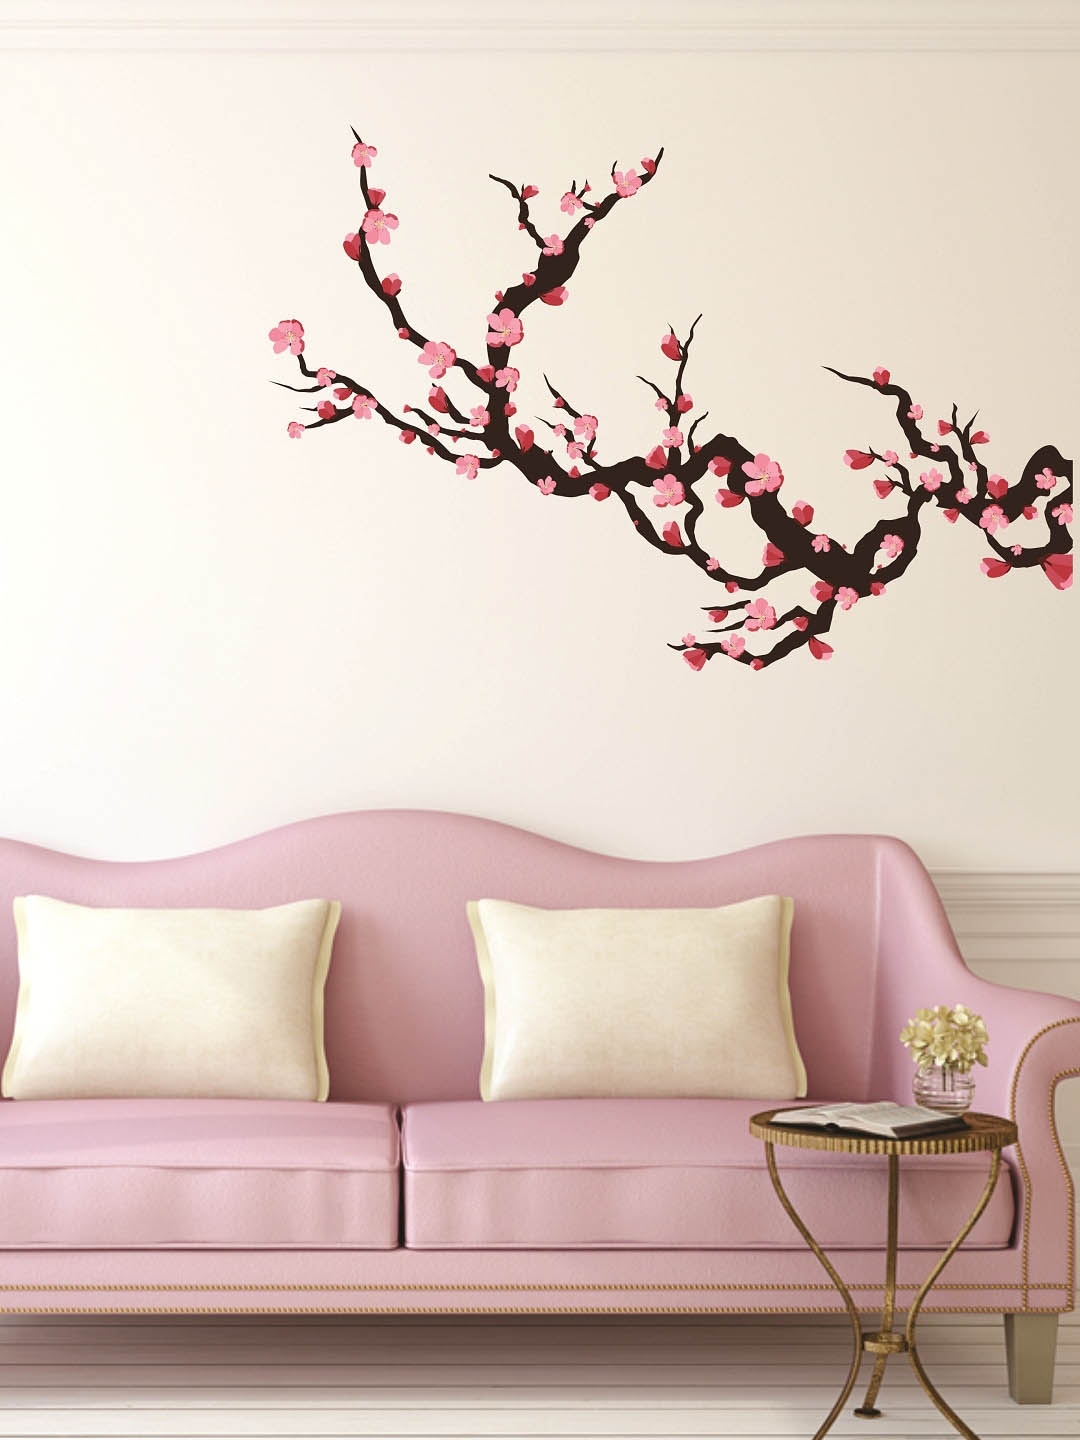 Buy WALLSTICK Black & Pink Floral Large Vinyl Wall Sticker - Decals And ...